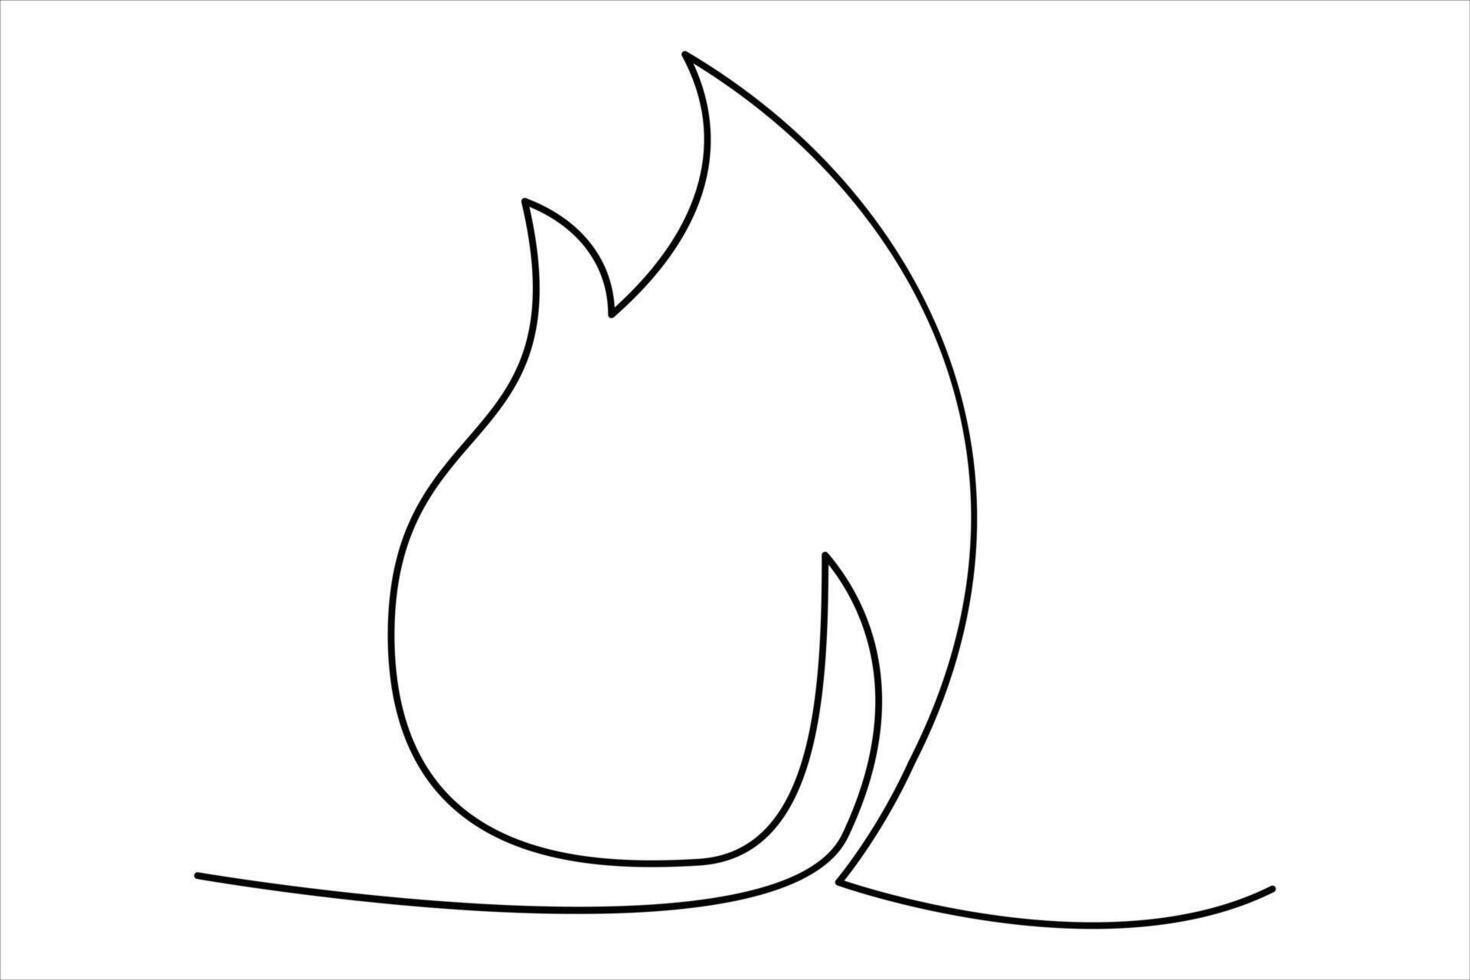 Continuous one line drawing fire art illustration of white background vector